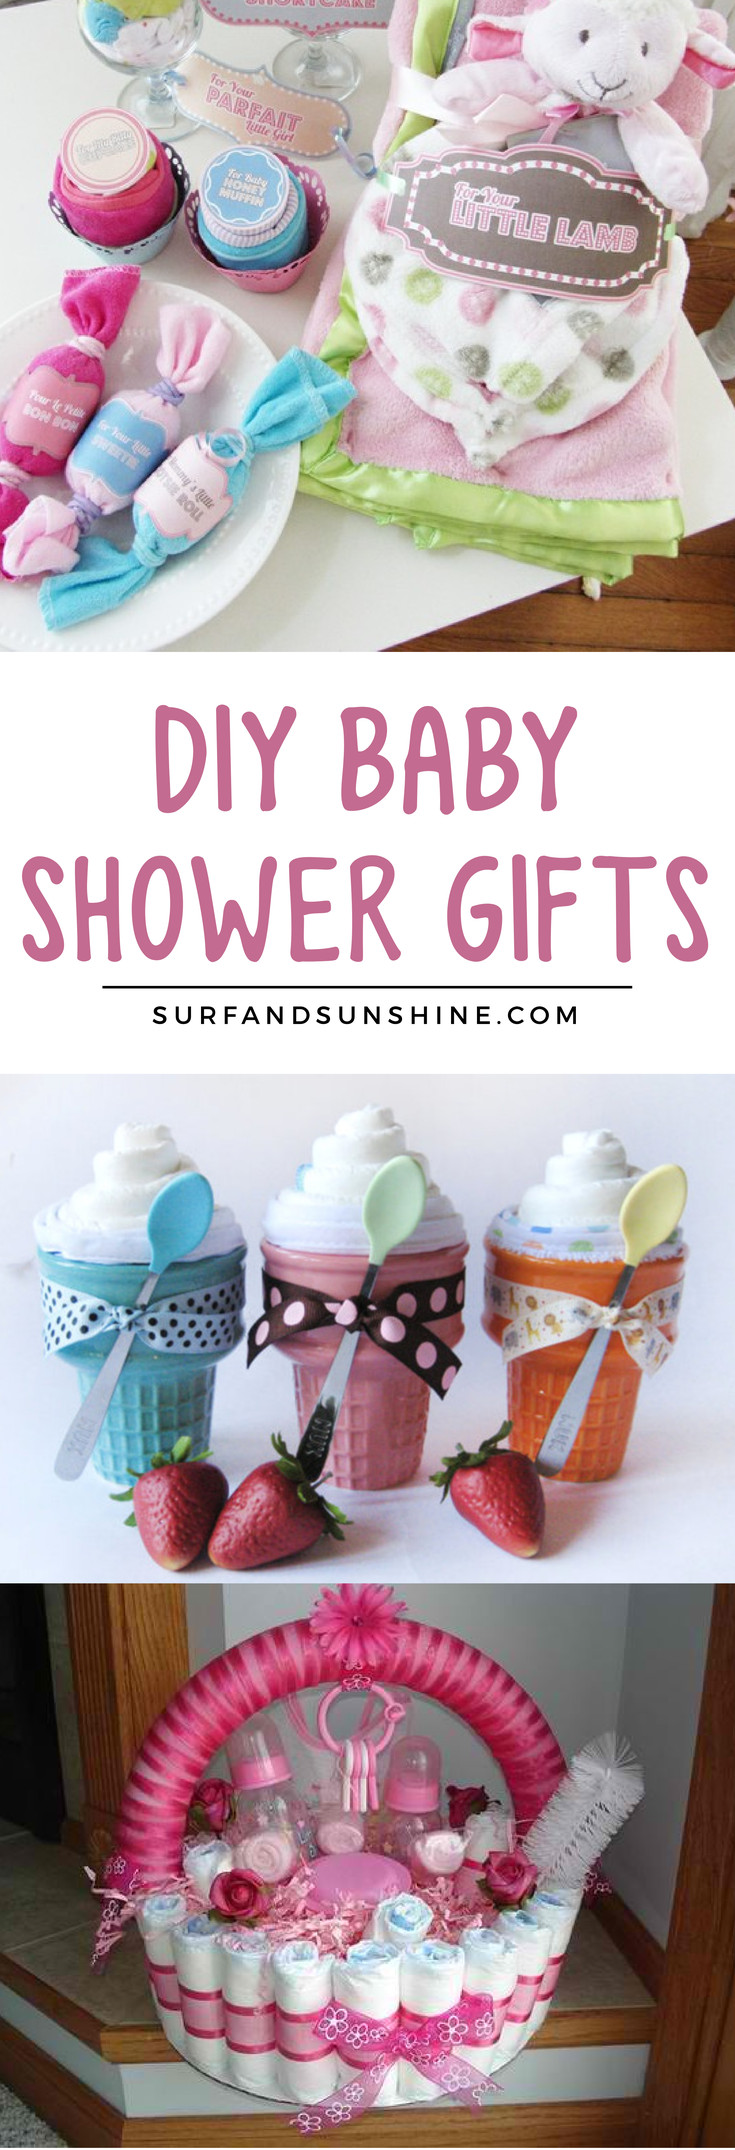 Unique DIY Baby Shower Gifts
 Unique DIY Baby Shower Gifts for Boys and Girls